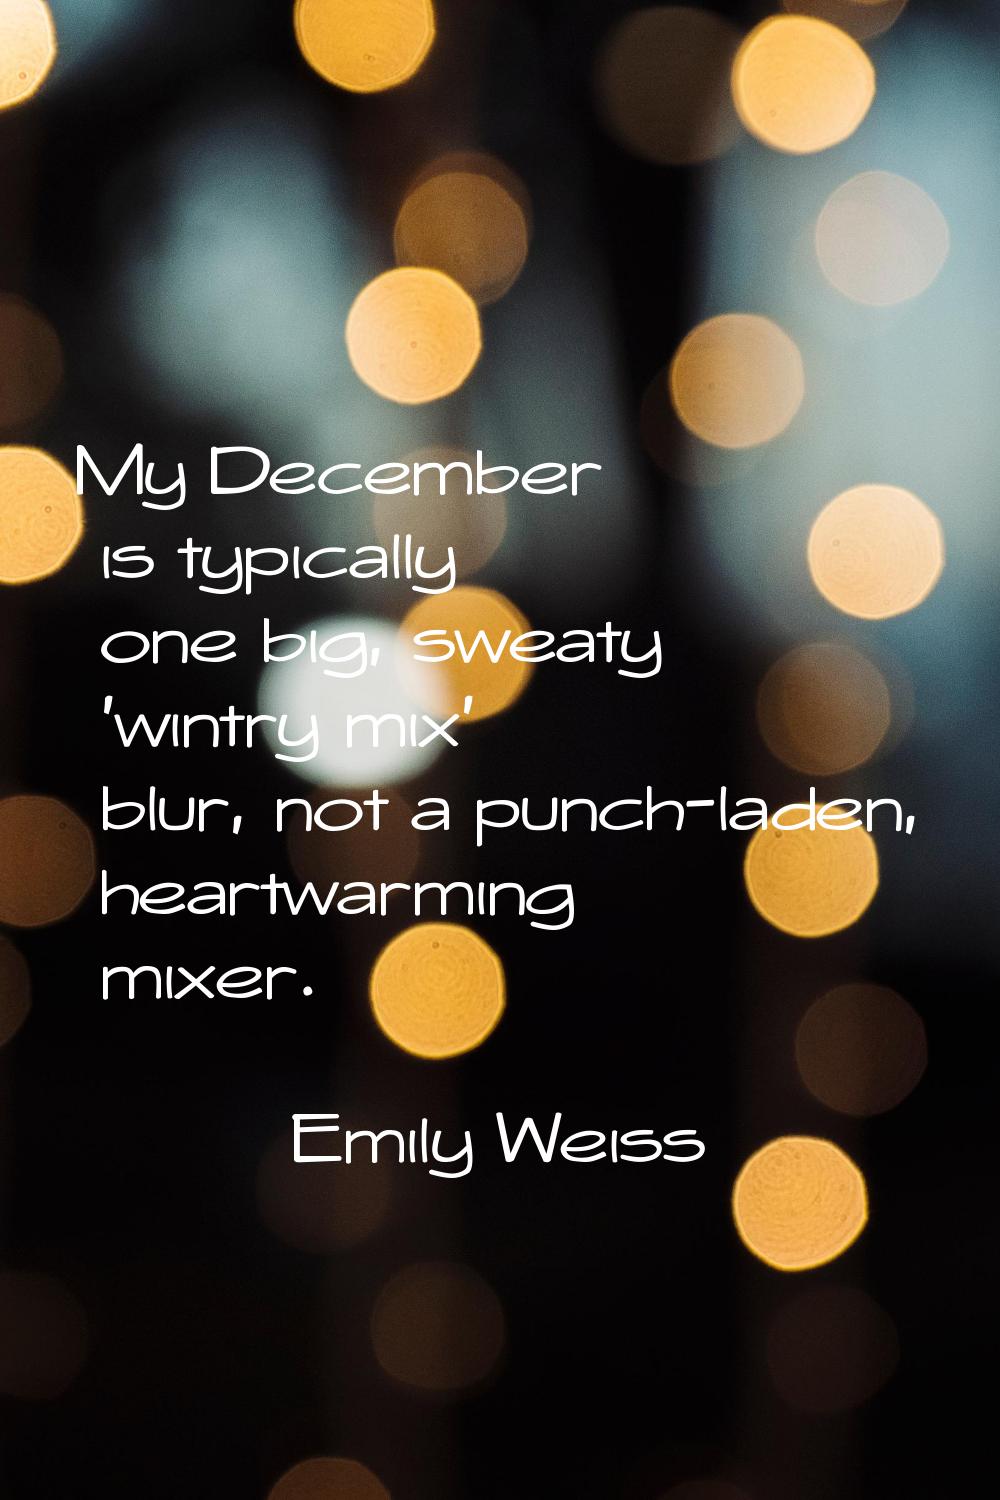 My December is typically one big, sweaty 'wintry mix' blur, not a punch-laden, heartwarming mixer.